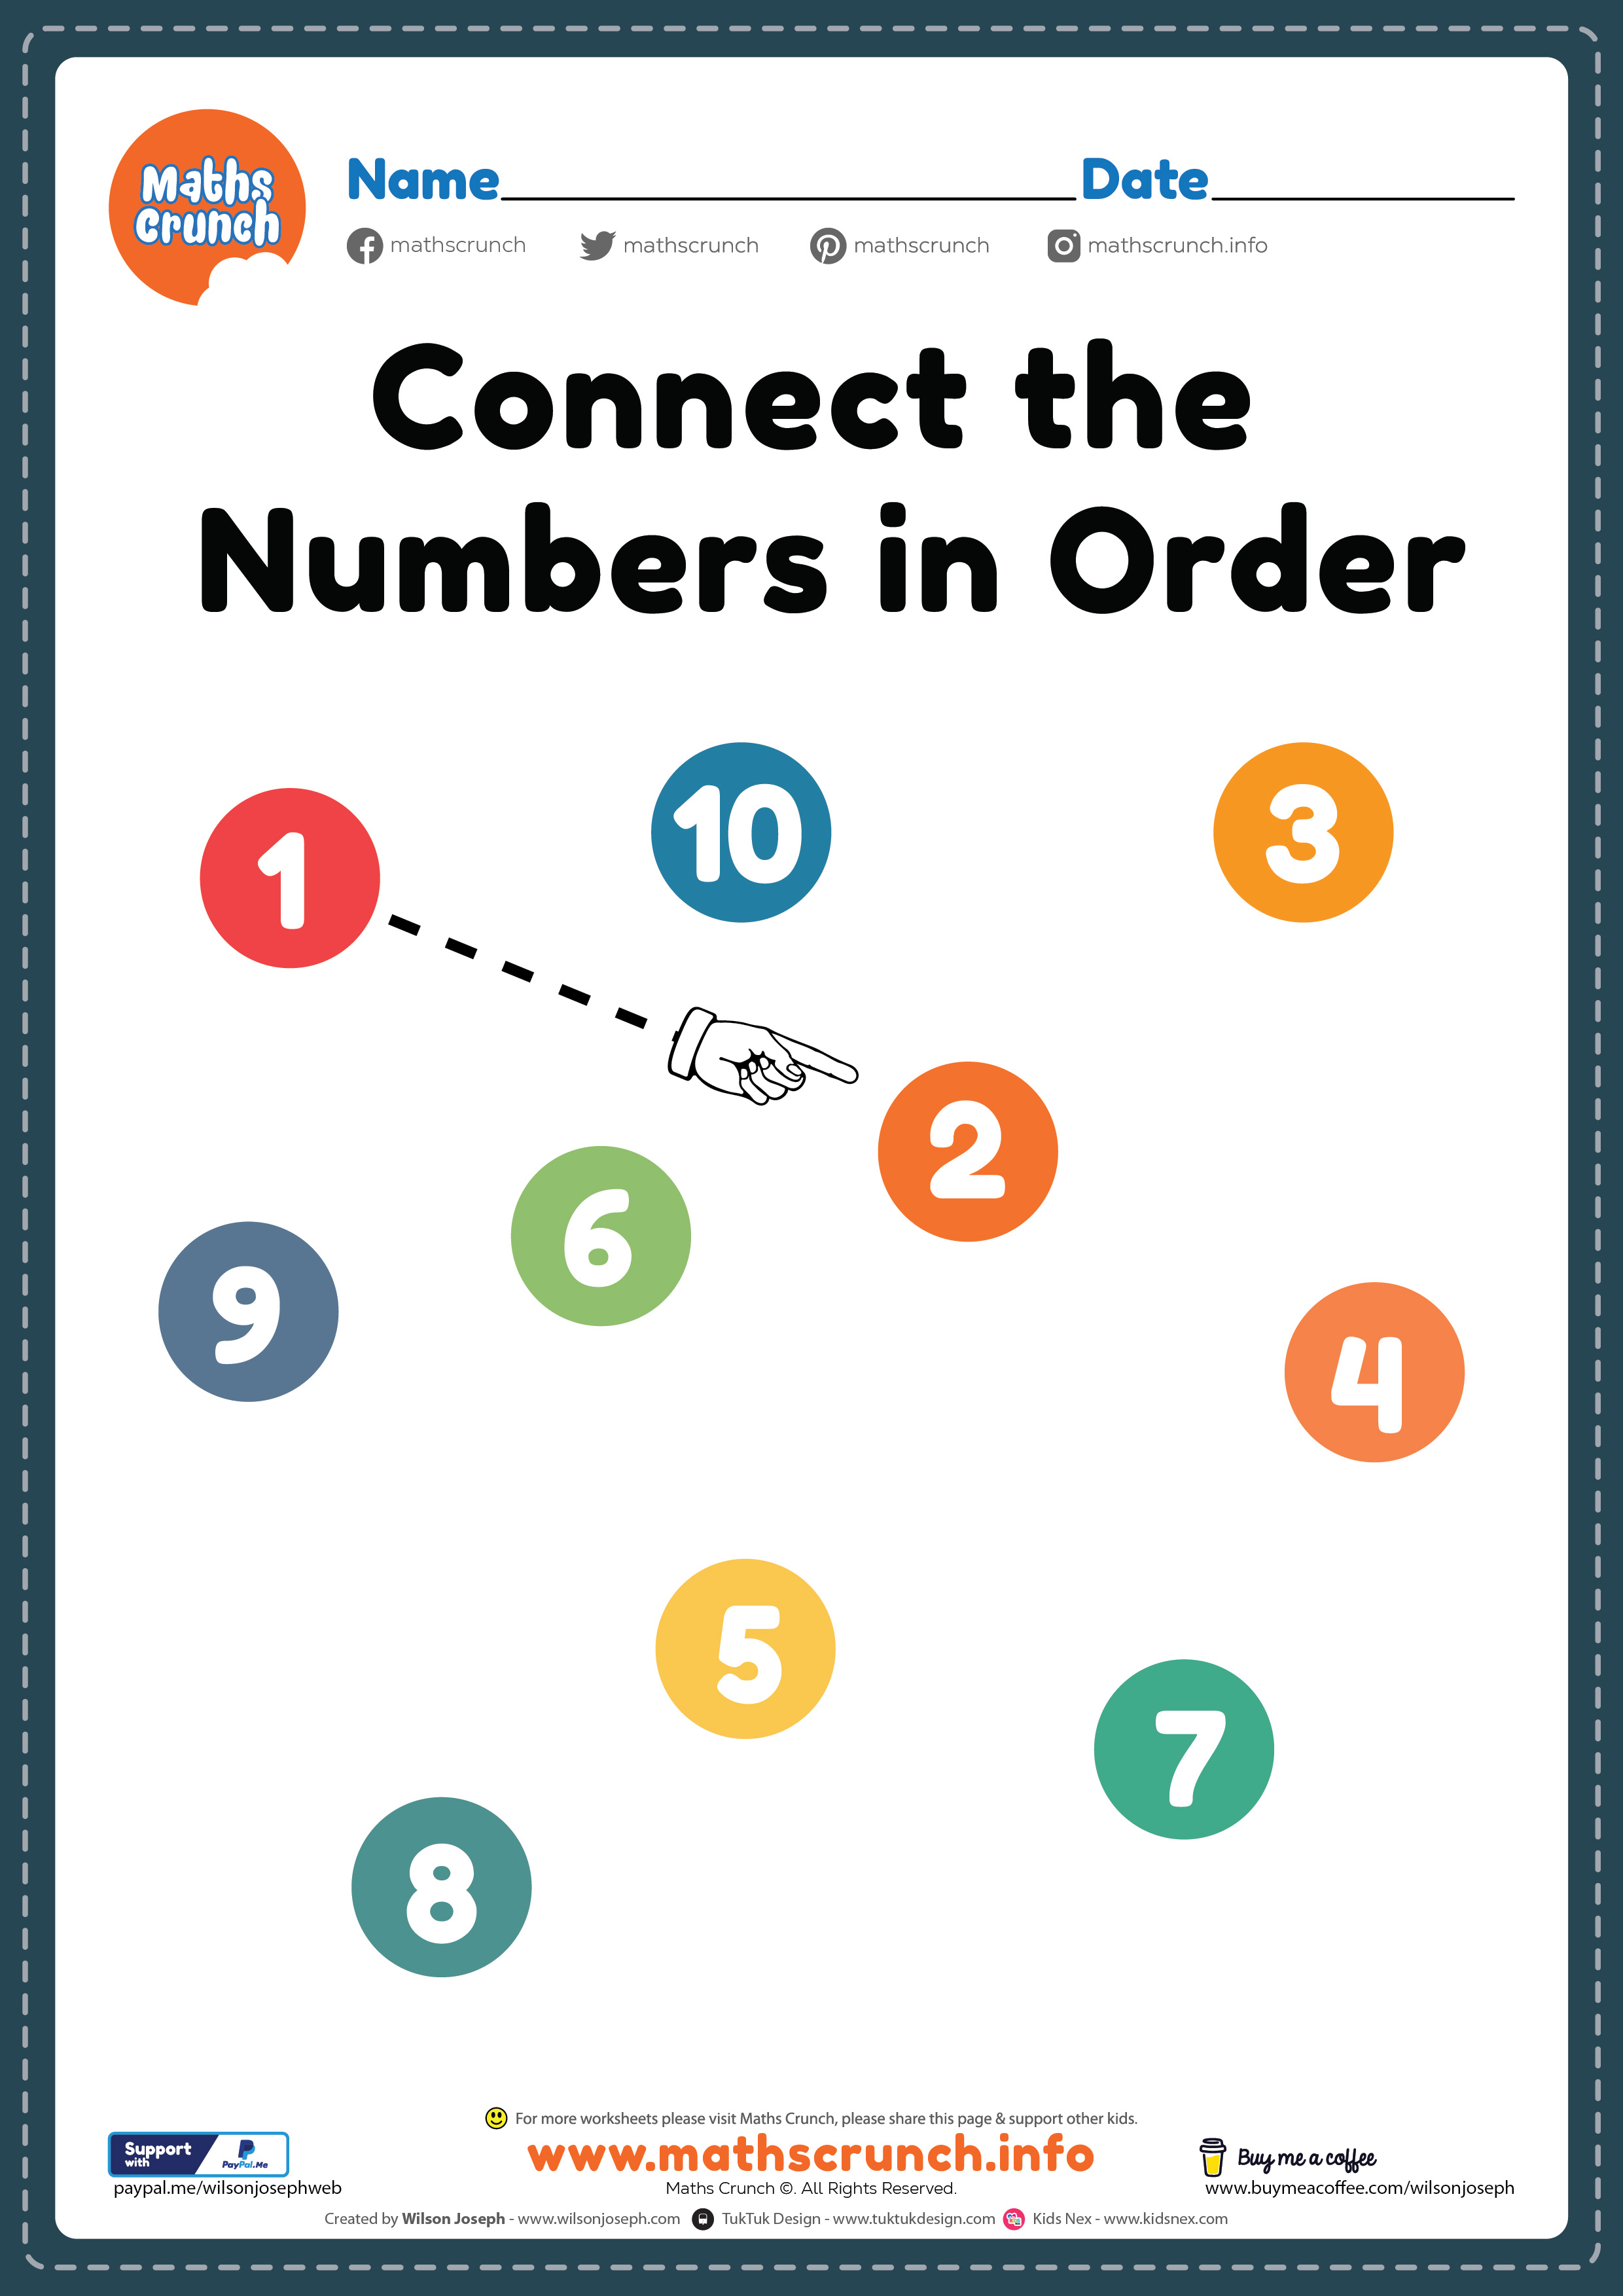 Connect the Numbers